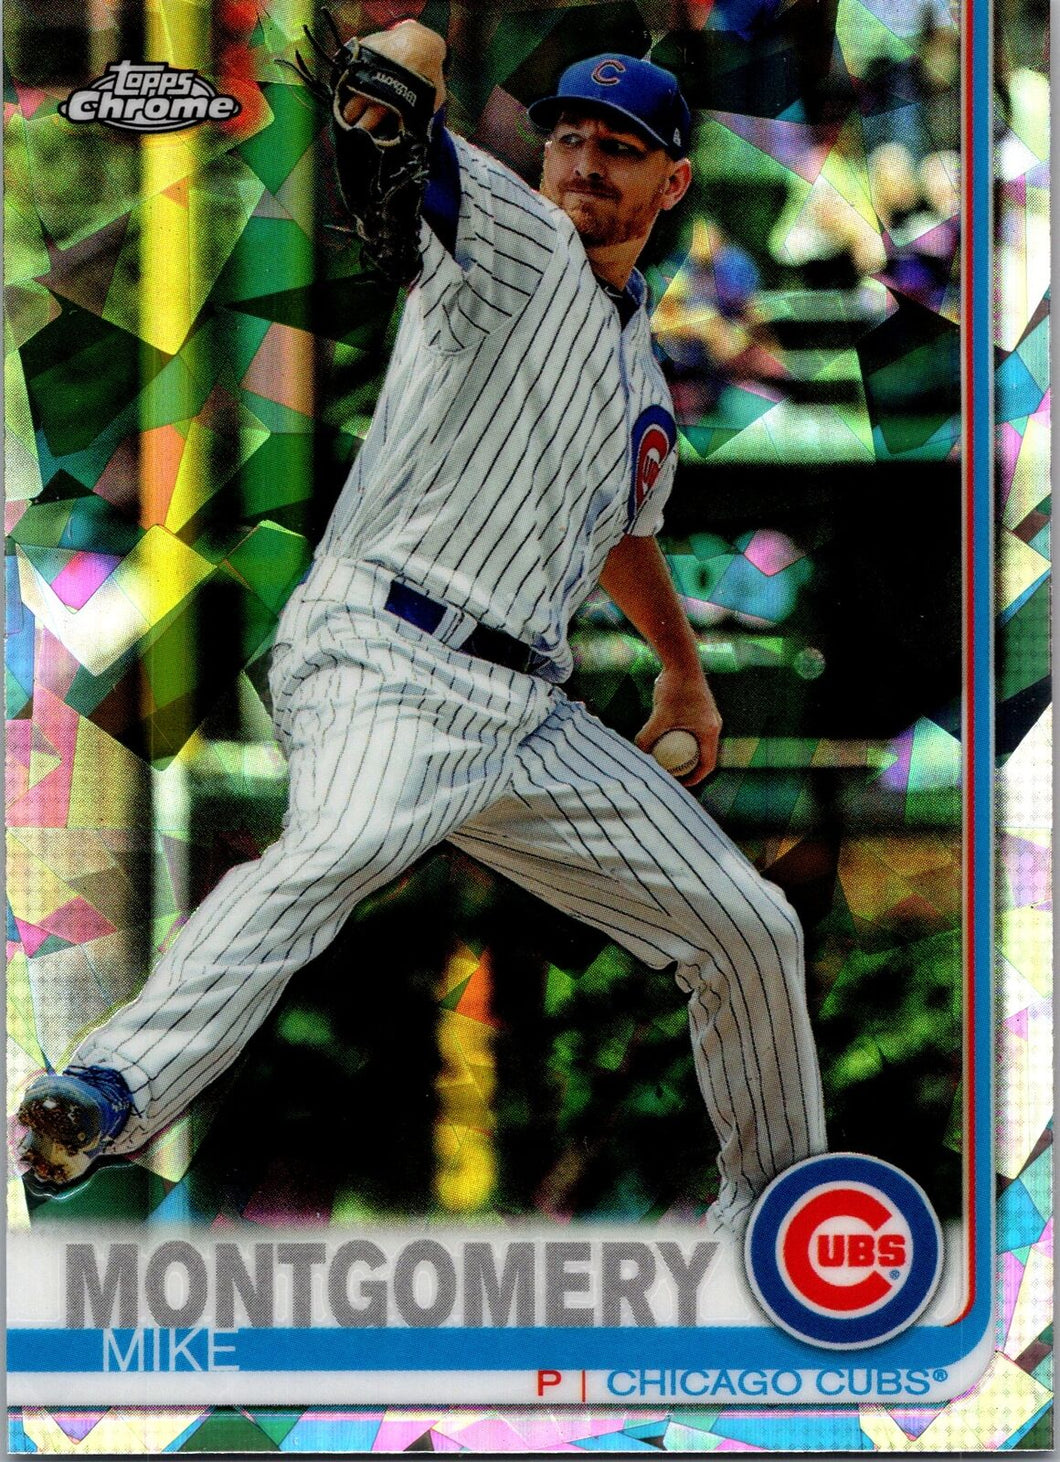 2019 Topps Chrome Sapphire Mike Montgomery #502 Chicago Cubs